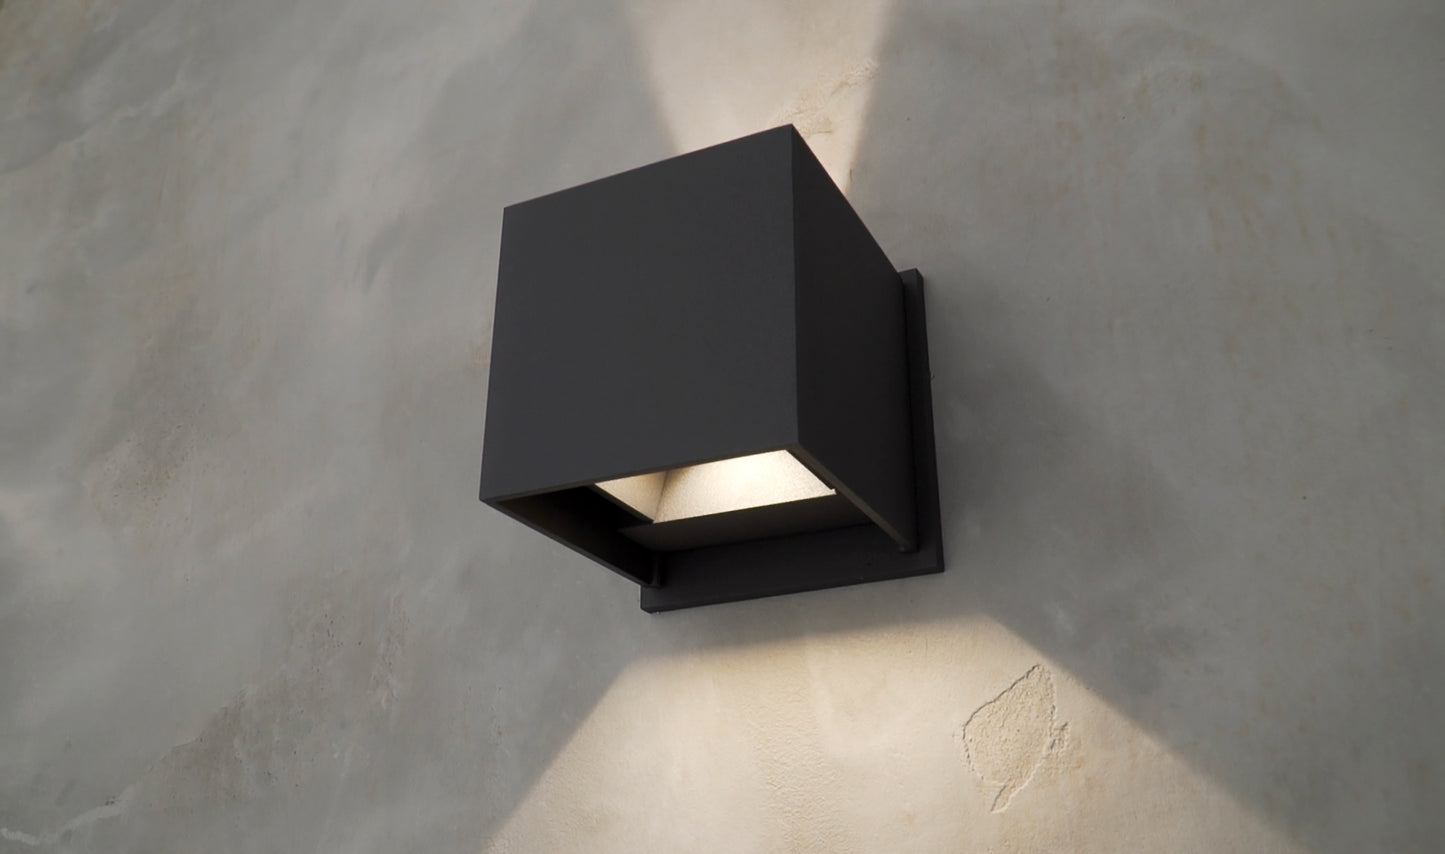 ET2 Alumilux: Cube LED Outdoor Wall Sconce